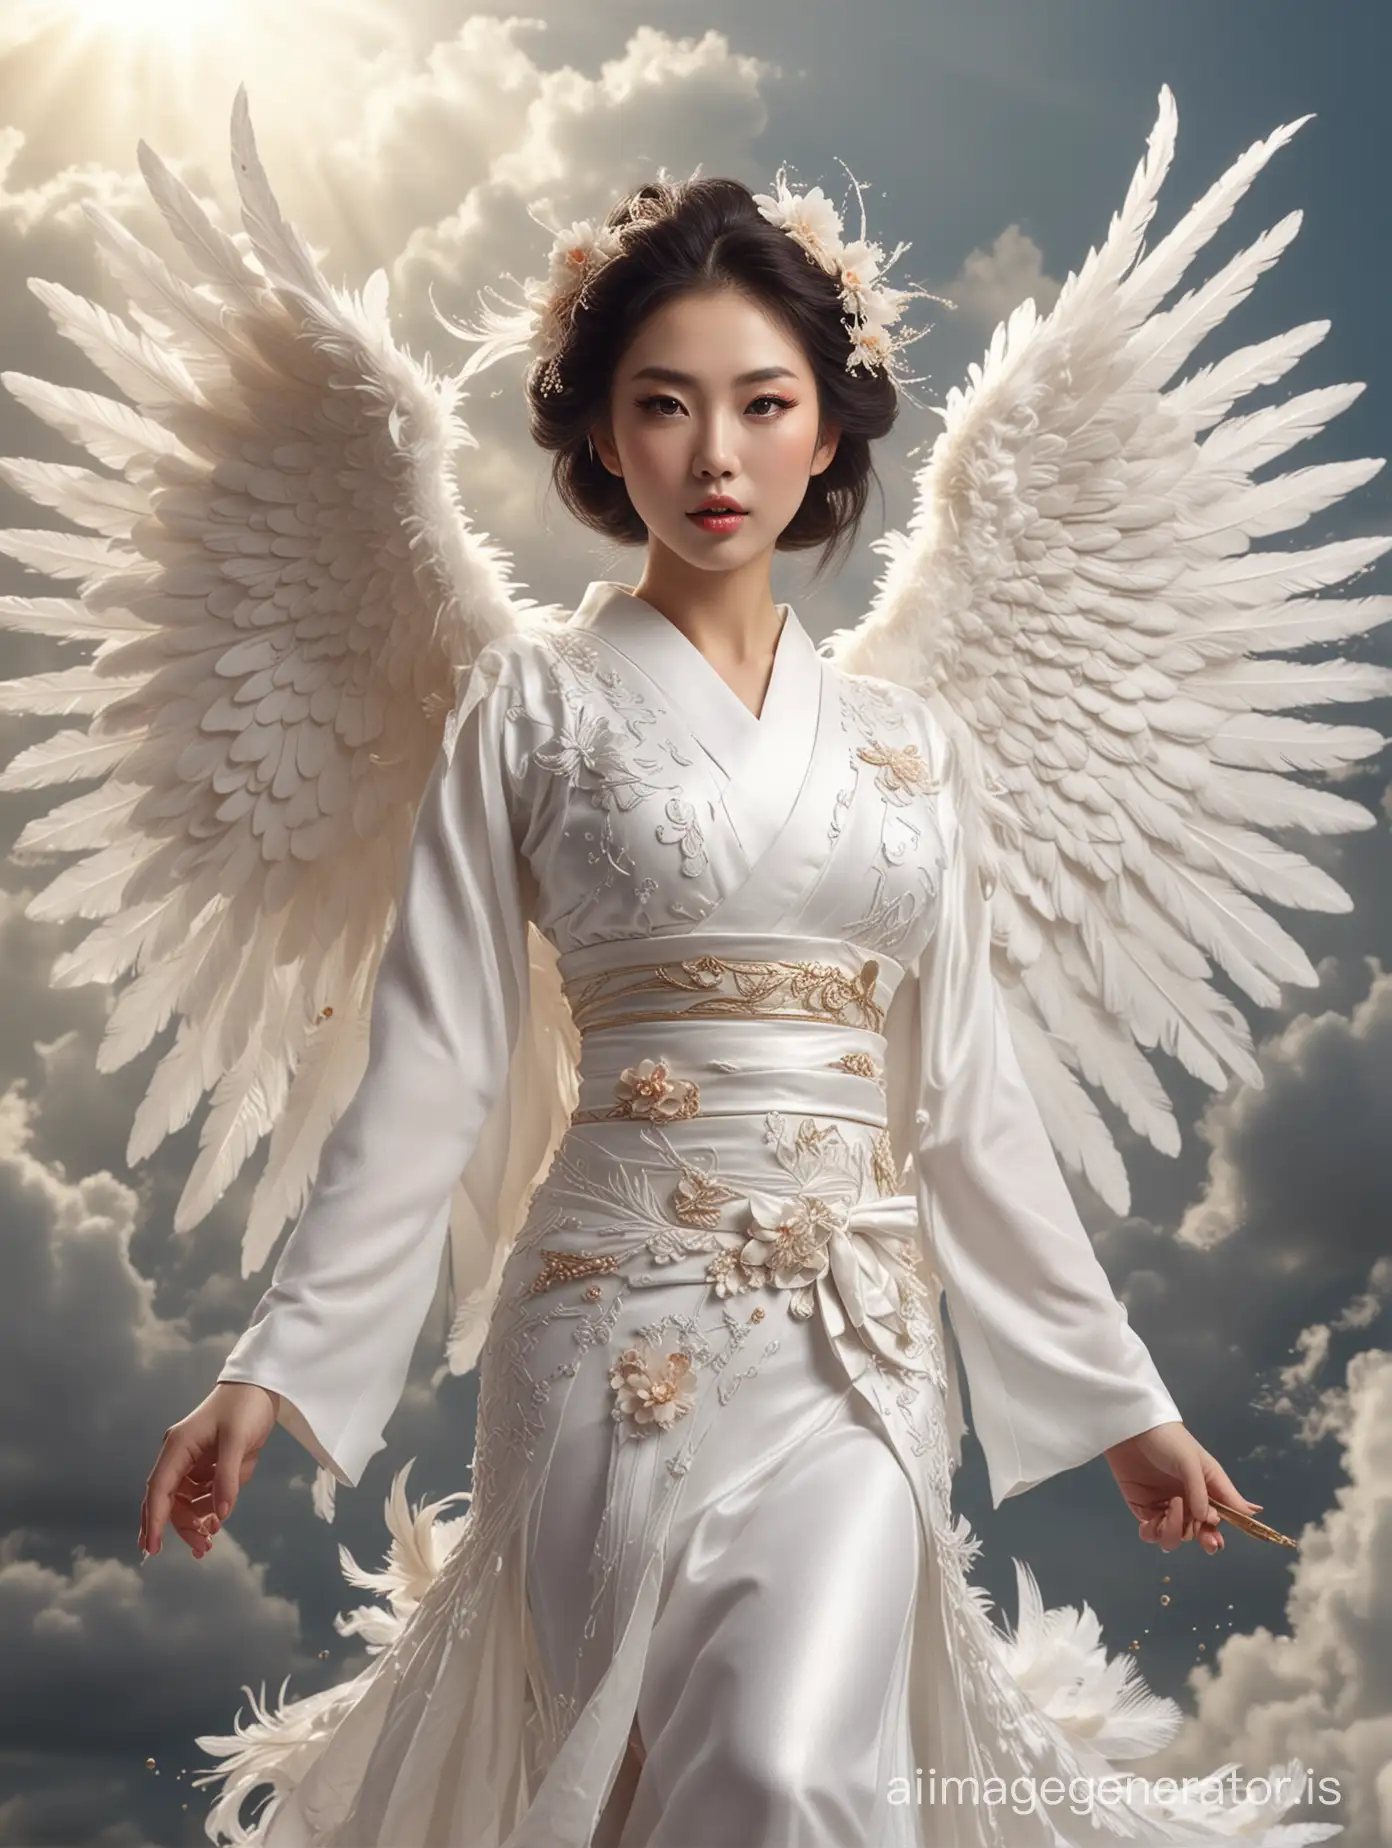 Graceful-Angelic-Geisha-Riding-Feathered-Dragon-in-Japanese-Cloudscape